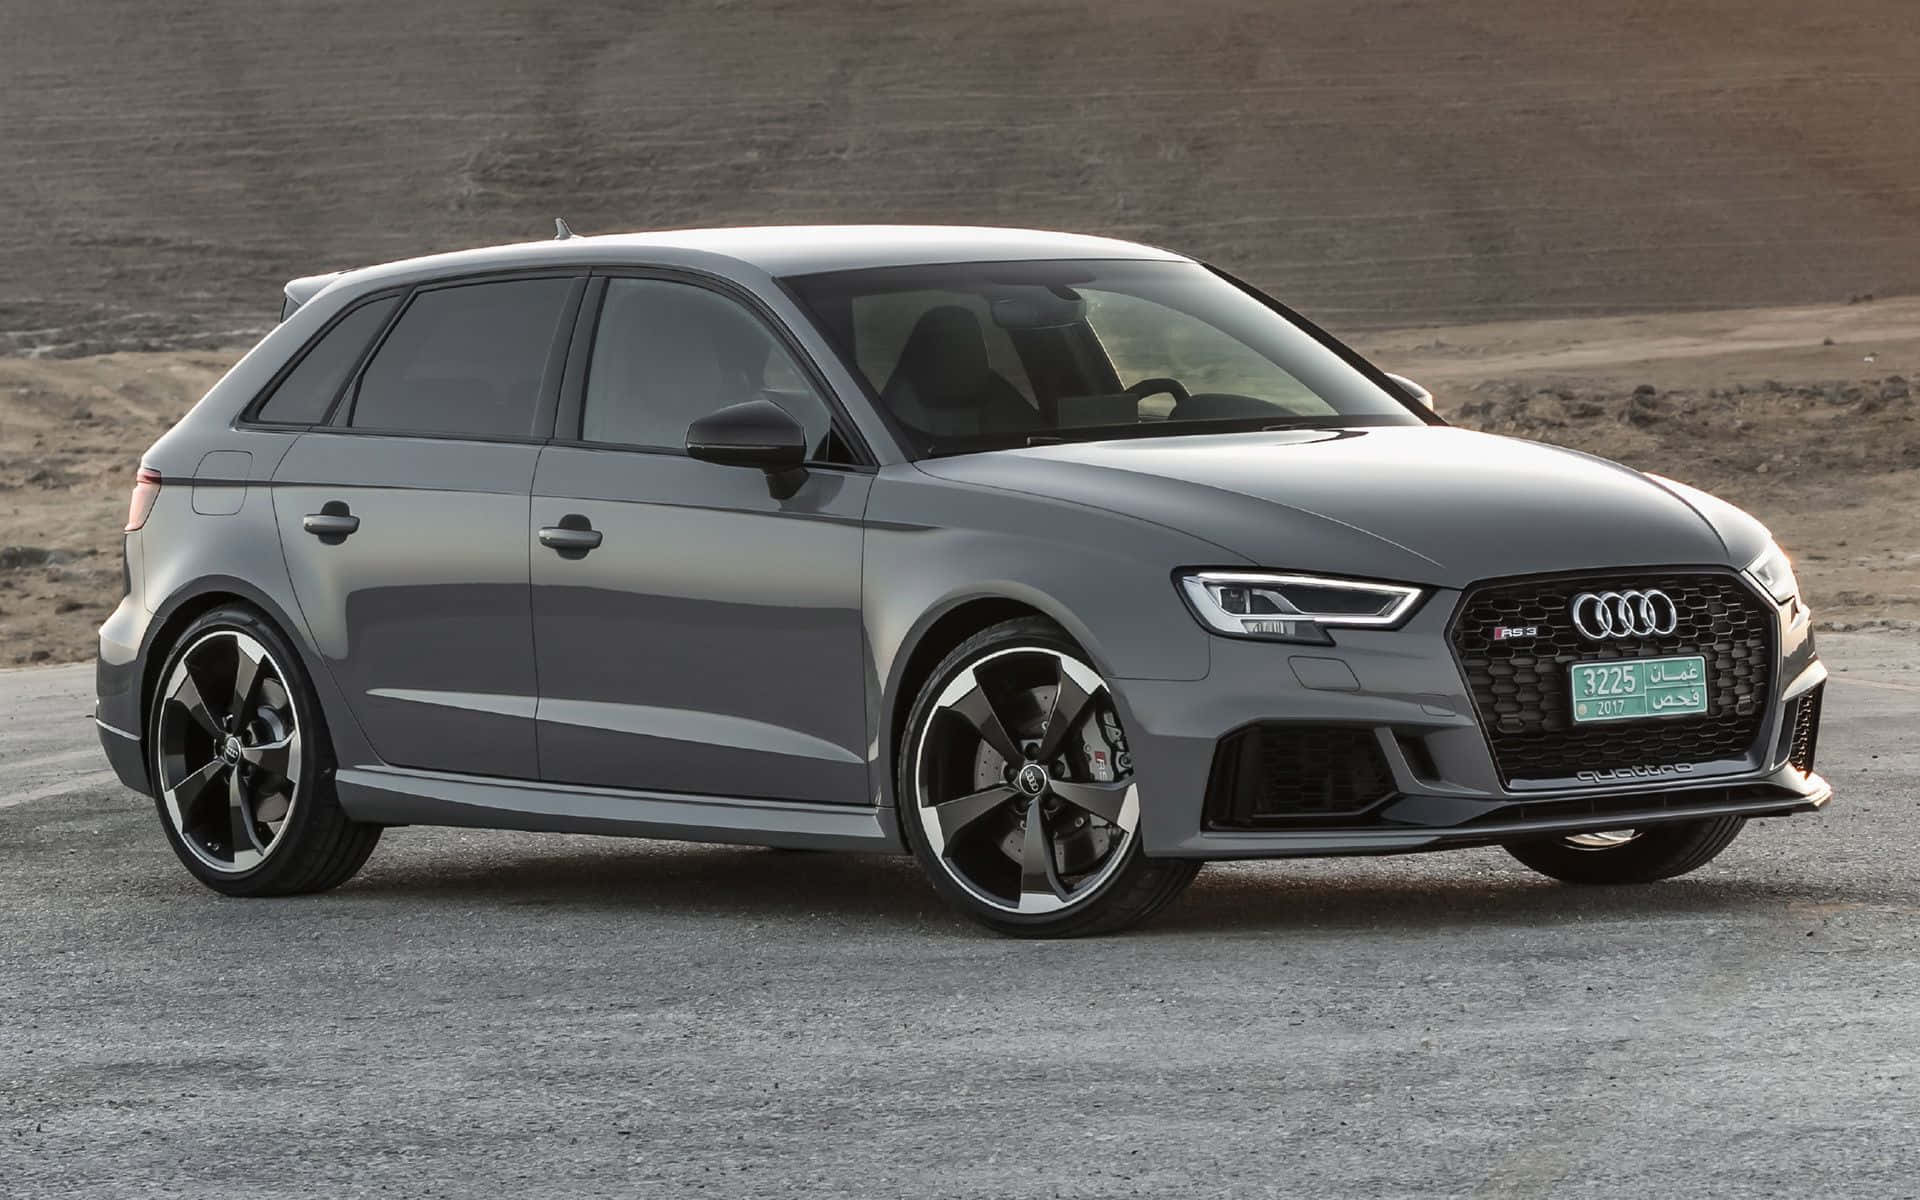 Stunning Audi RS3 in motion Wallpaper